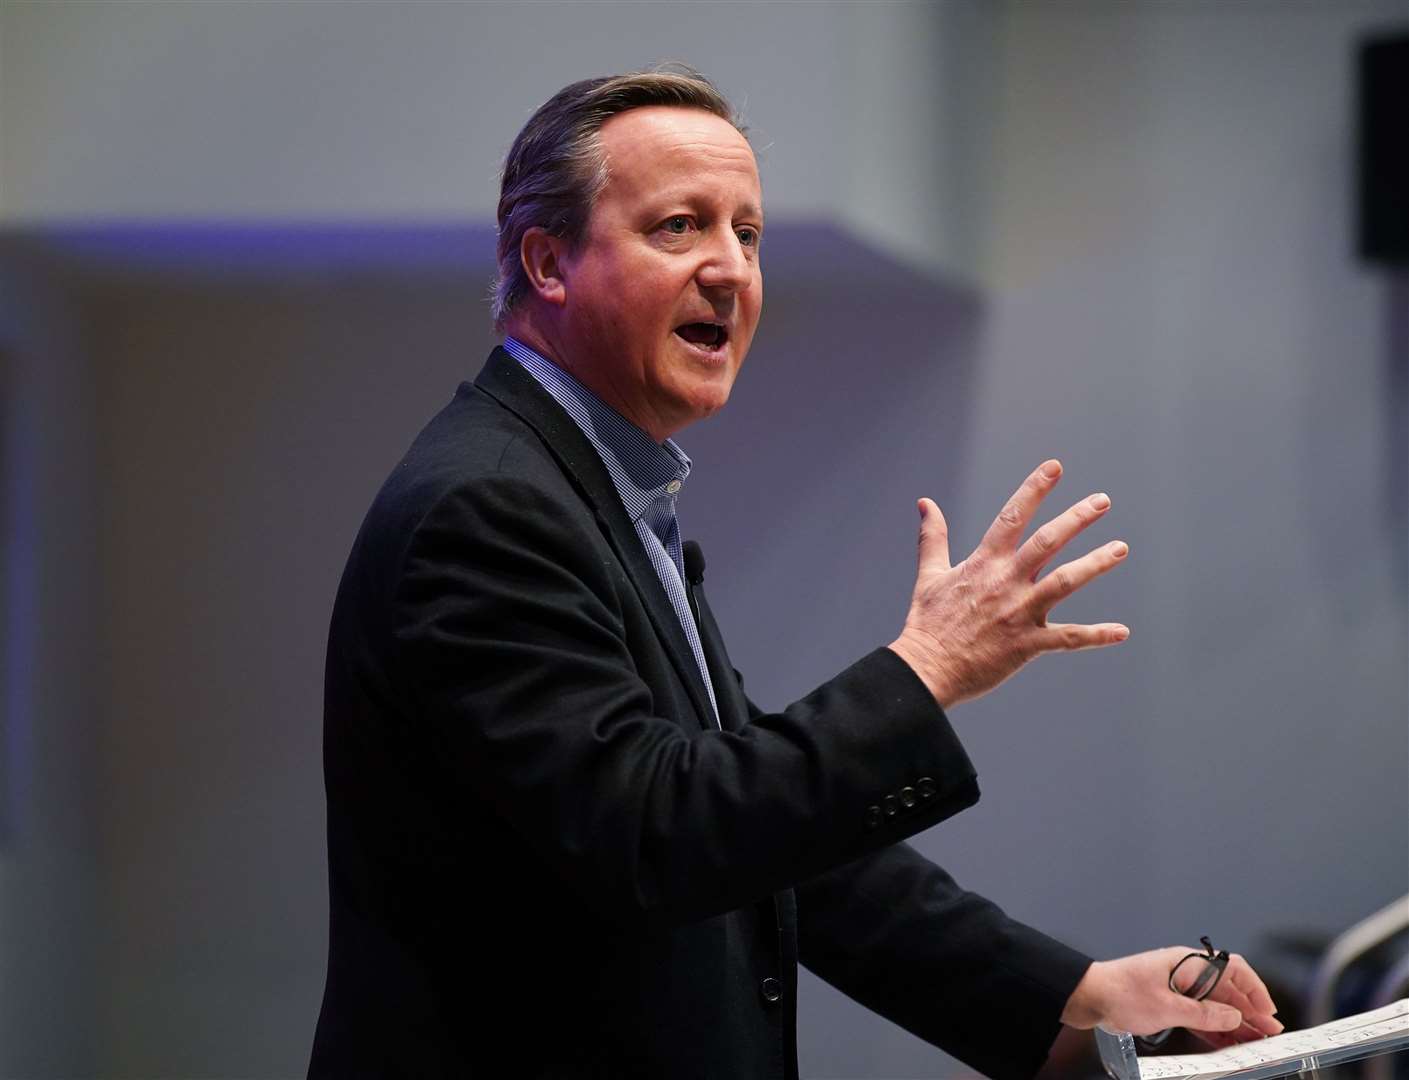 Former prime minister David Cameron was criticised for lobbying on behalf of Greensill Capital, but his actions were found to have been within the rules (Yui Mok/PA)